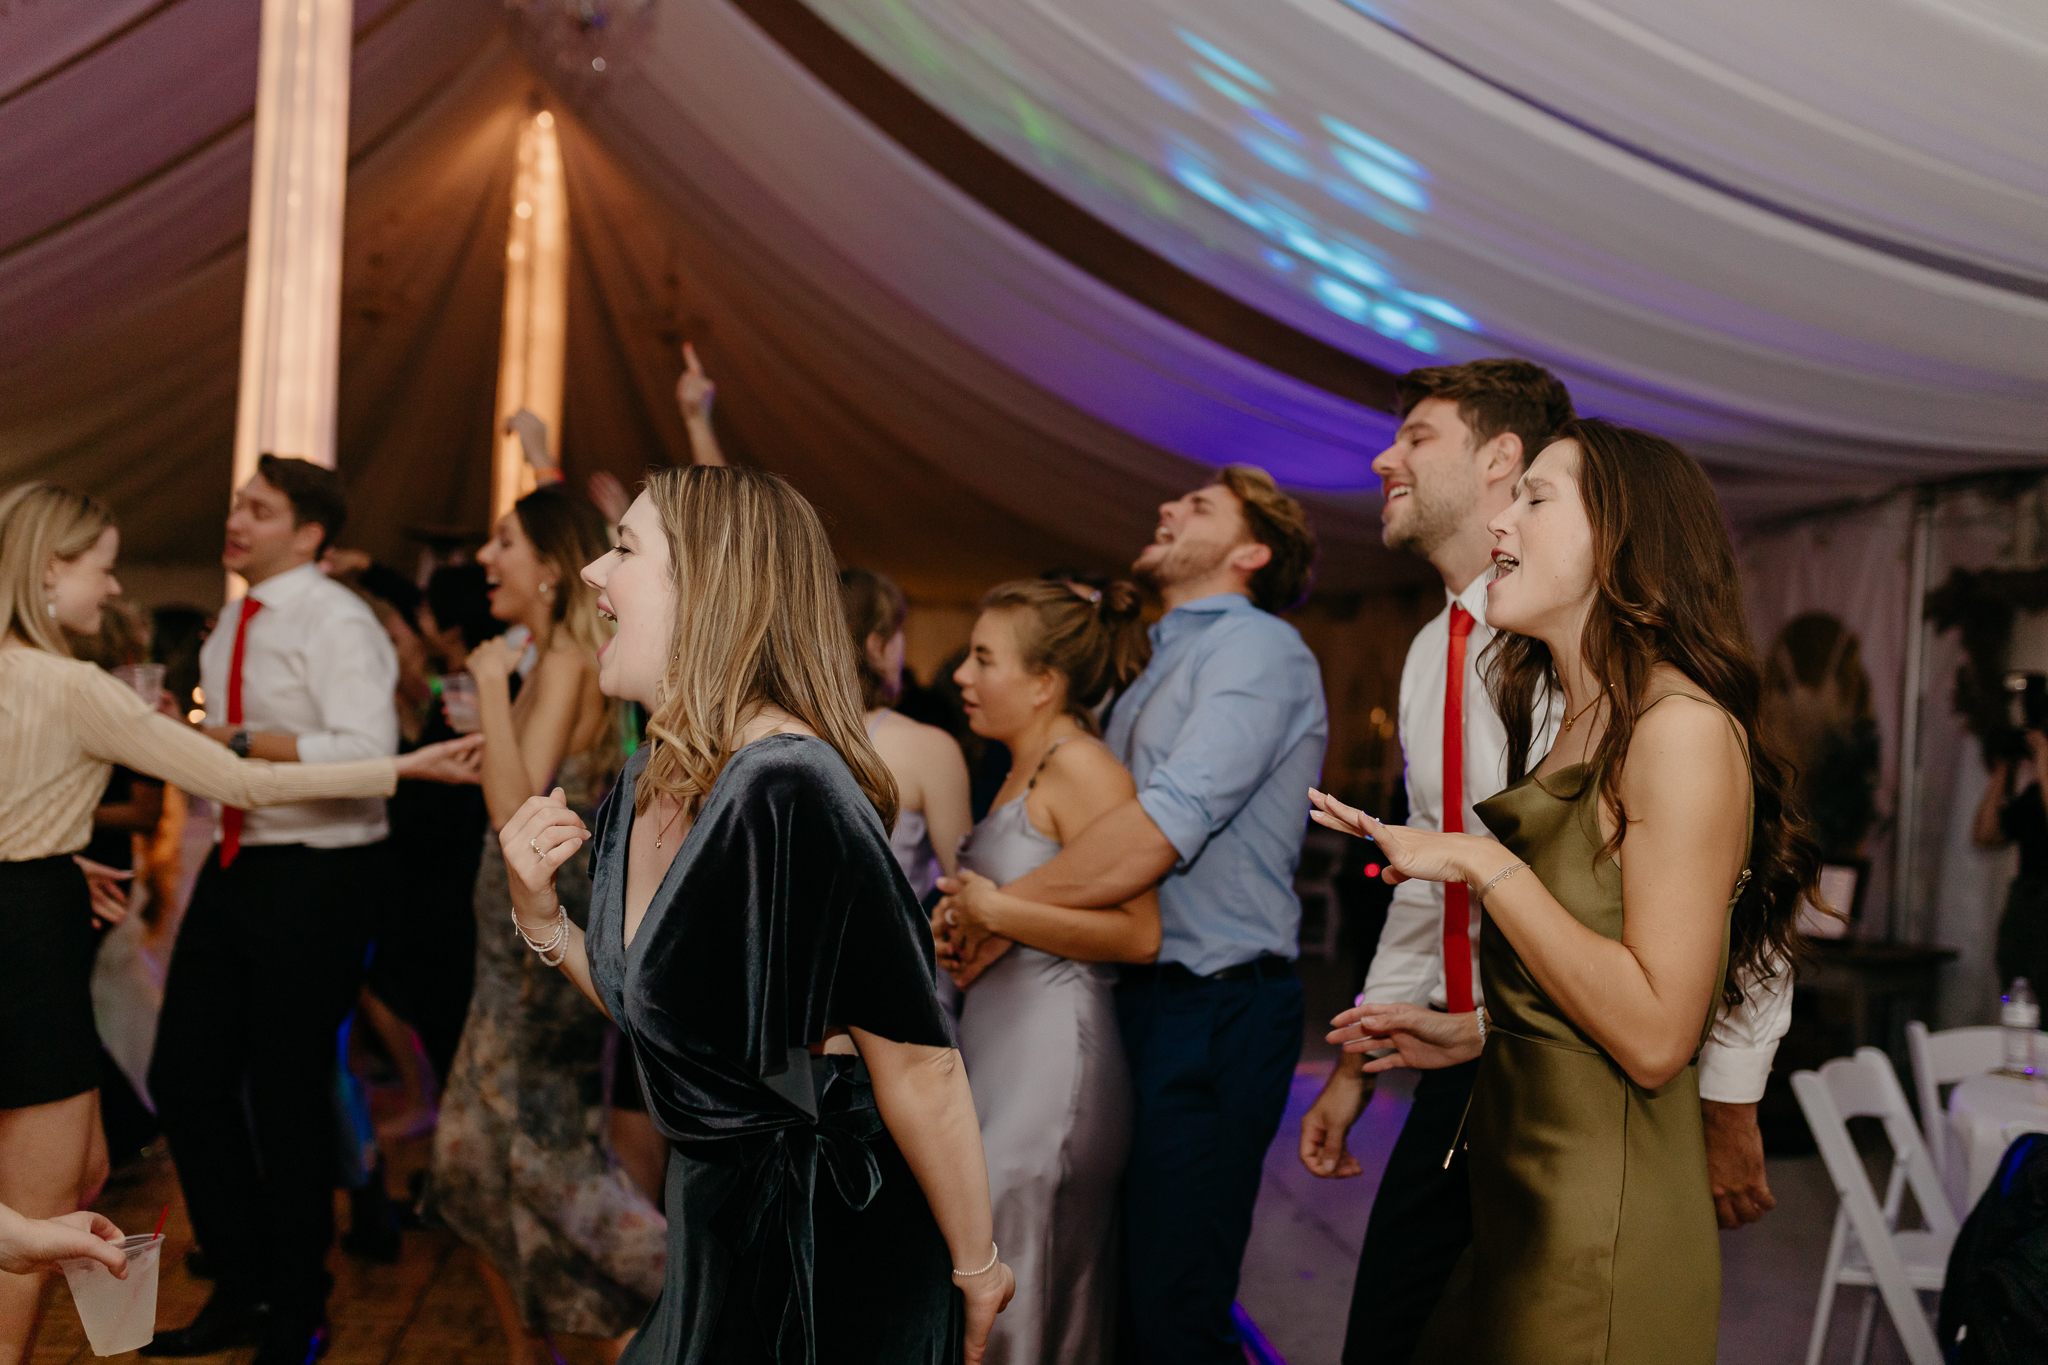 Wedding guests dancing on the dance floor together at a Chicago outdoor tent wedding reception